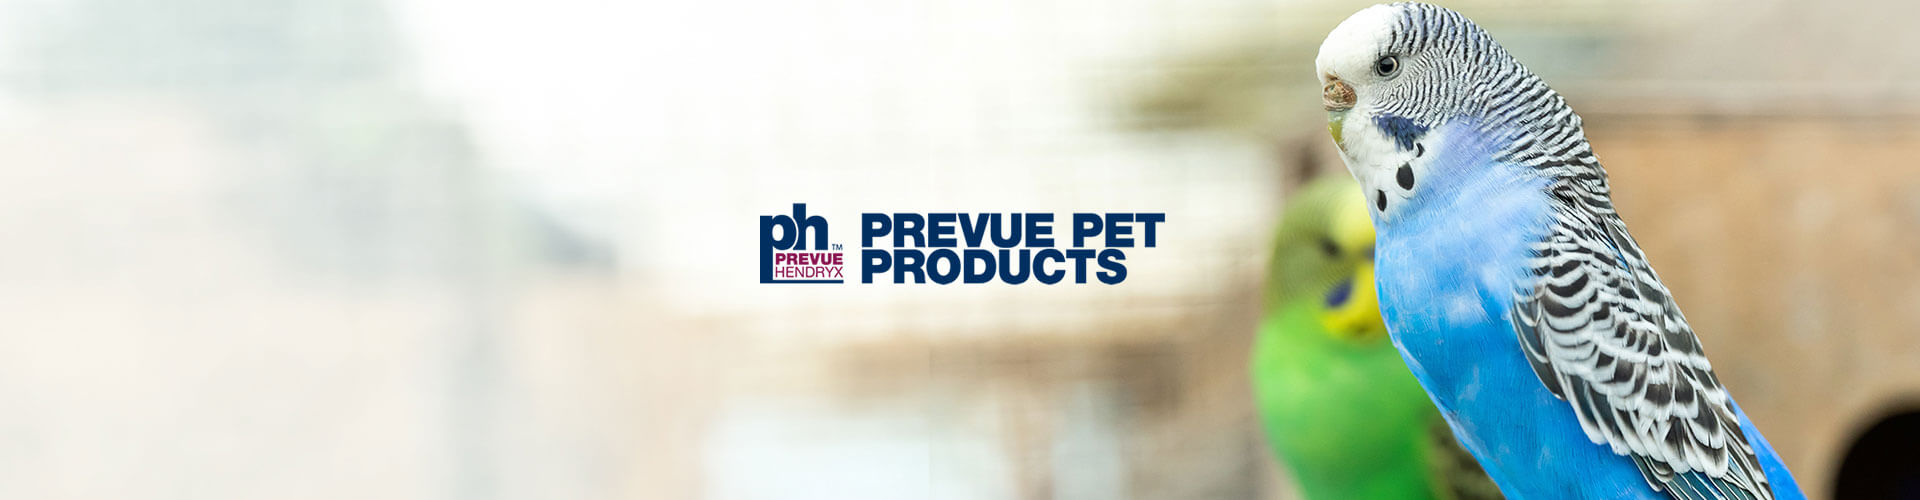 Prevue Pet Products banner